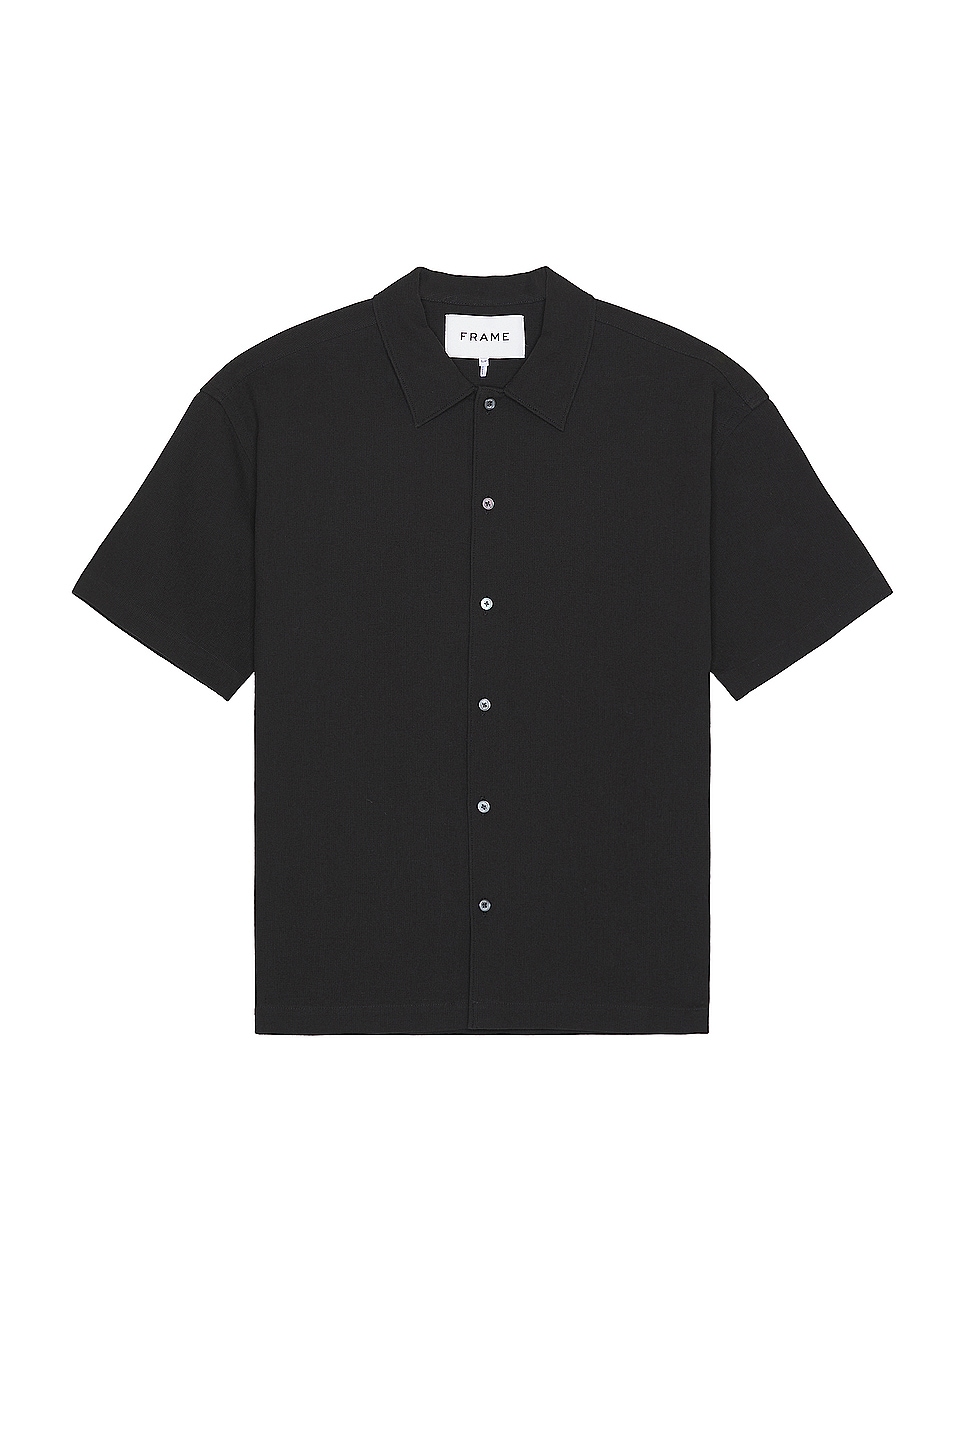 Image 1 of FRAME Waffle Textured Shirt in Black